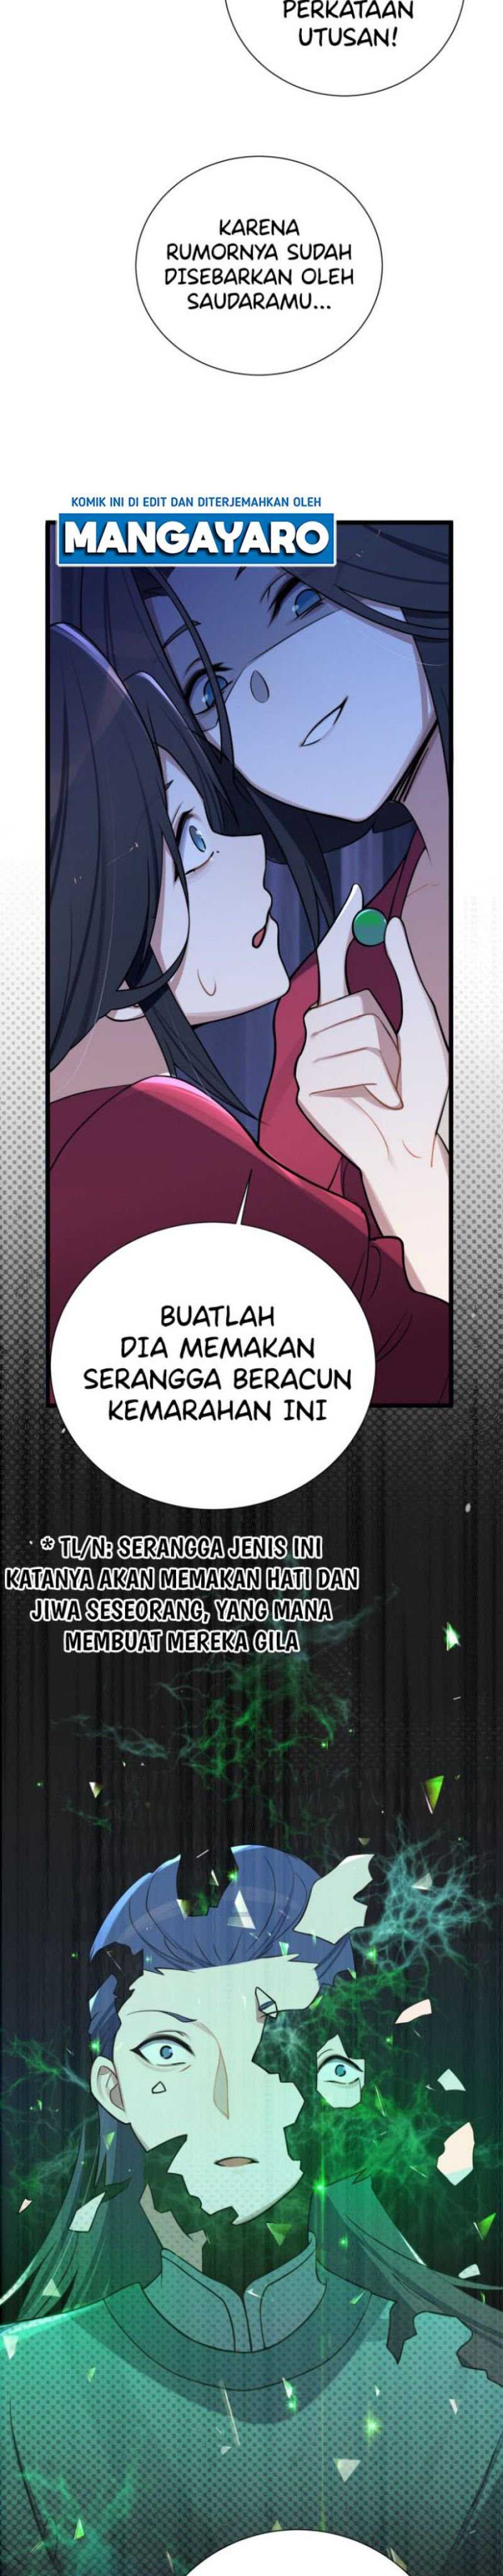 The Lady is the Future Tyrant Chapter 08